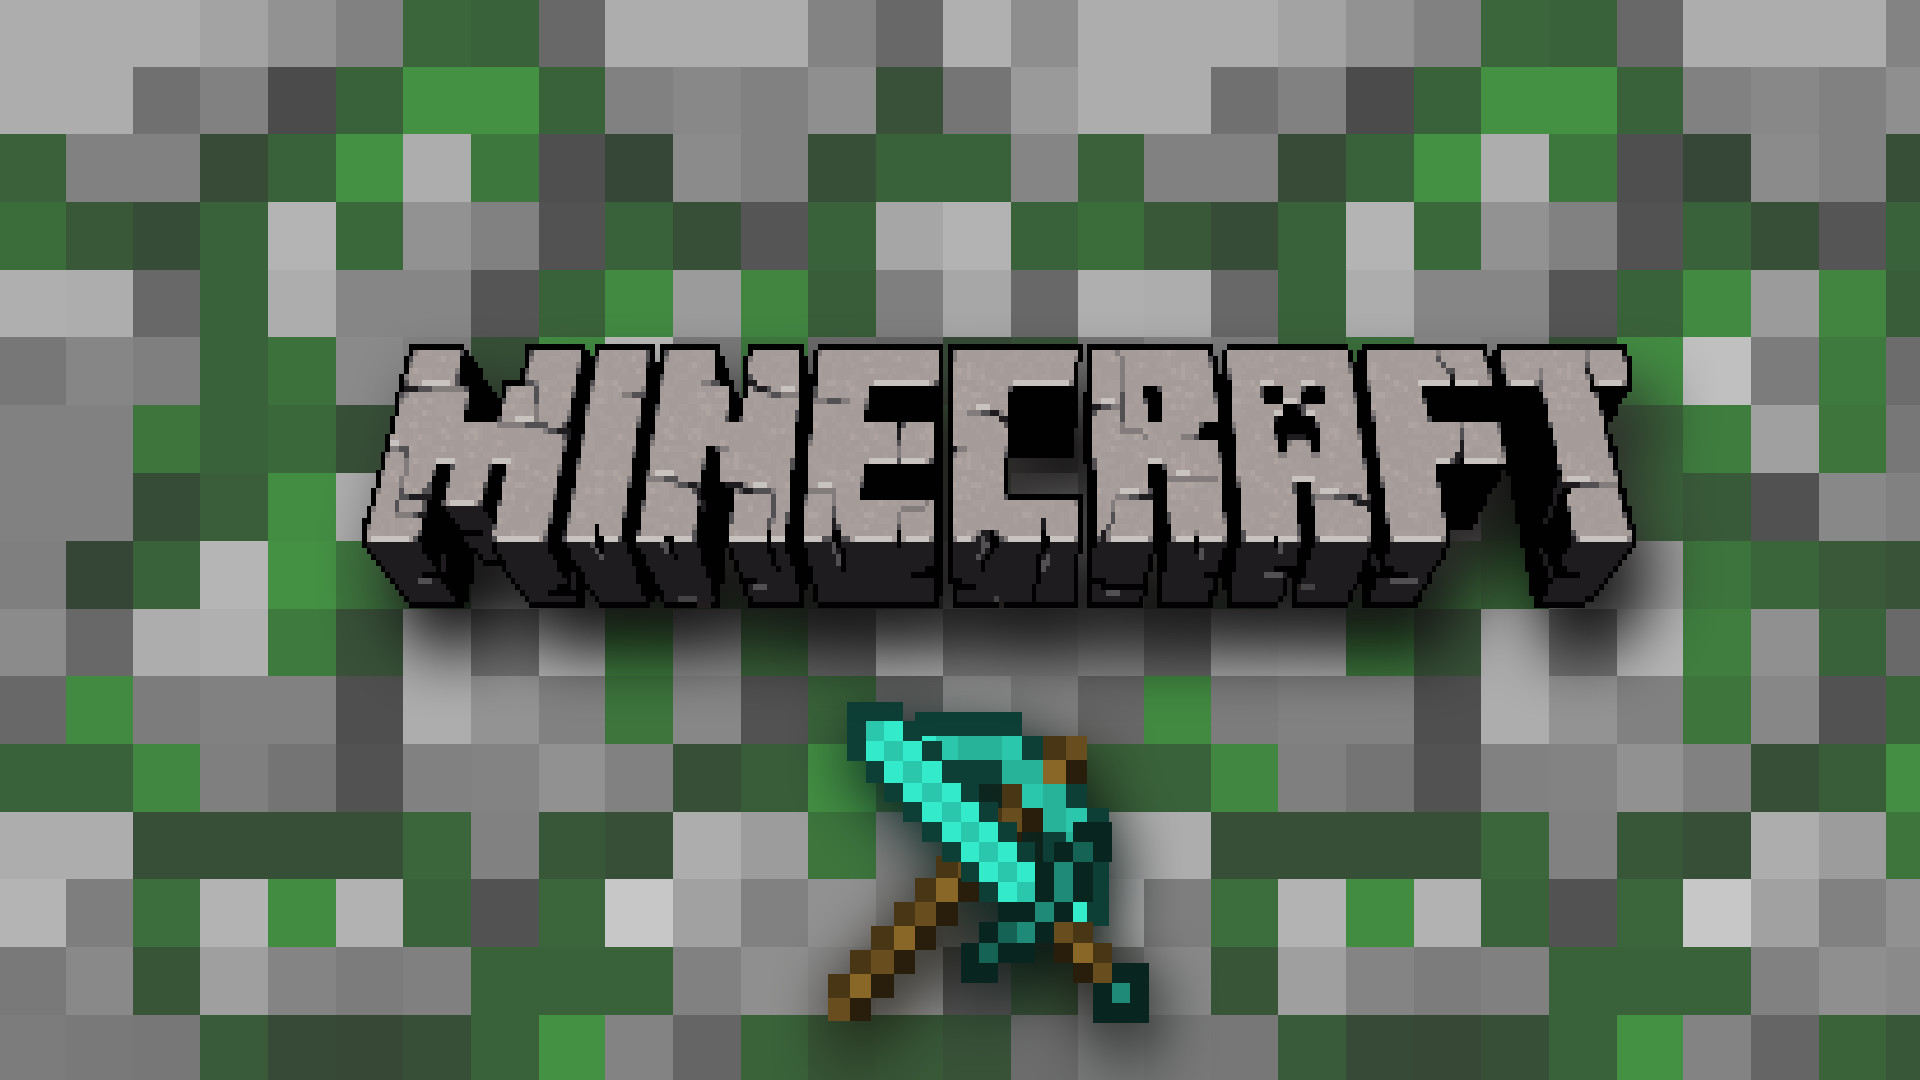 1920x1080 My Minecraft Wallpapers! - Fan Art - Show Your Creation - Minecraft Forum -  Minecraft Forum